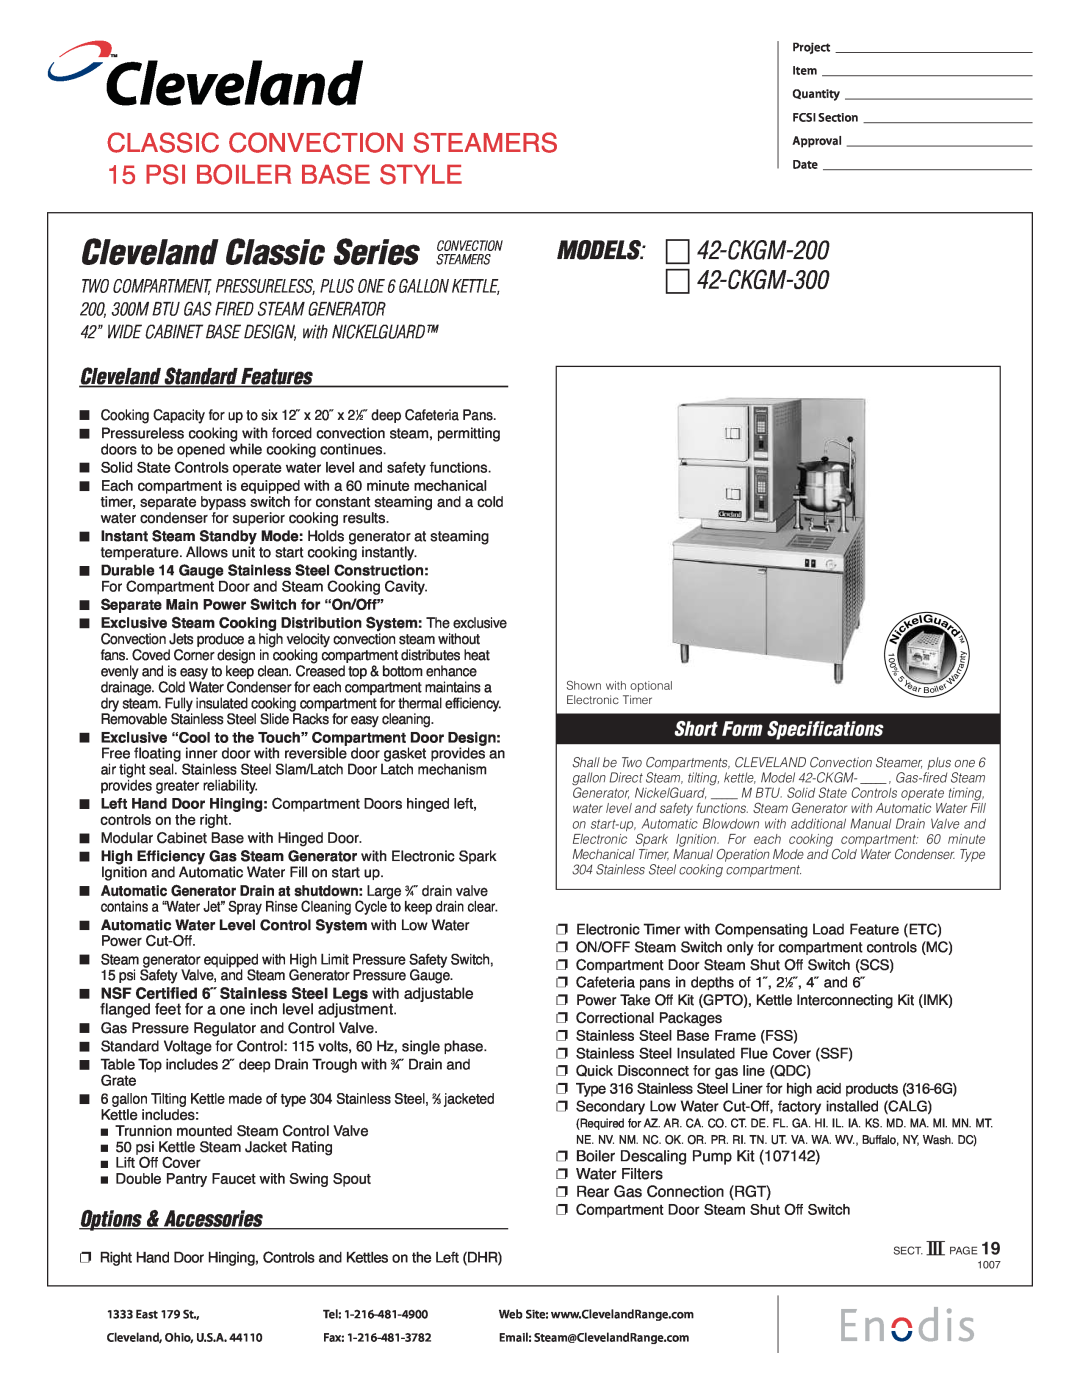 Cleveland Range 42-CKGM-200 specifications Cleveland Classic Series CONVECTION, Cleveland Standard Features 